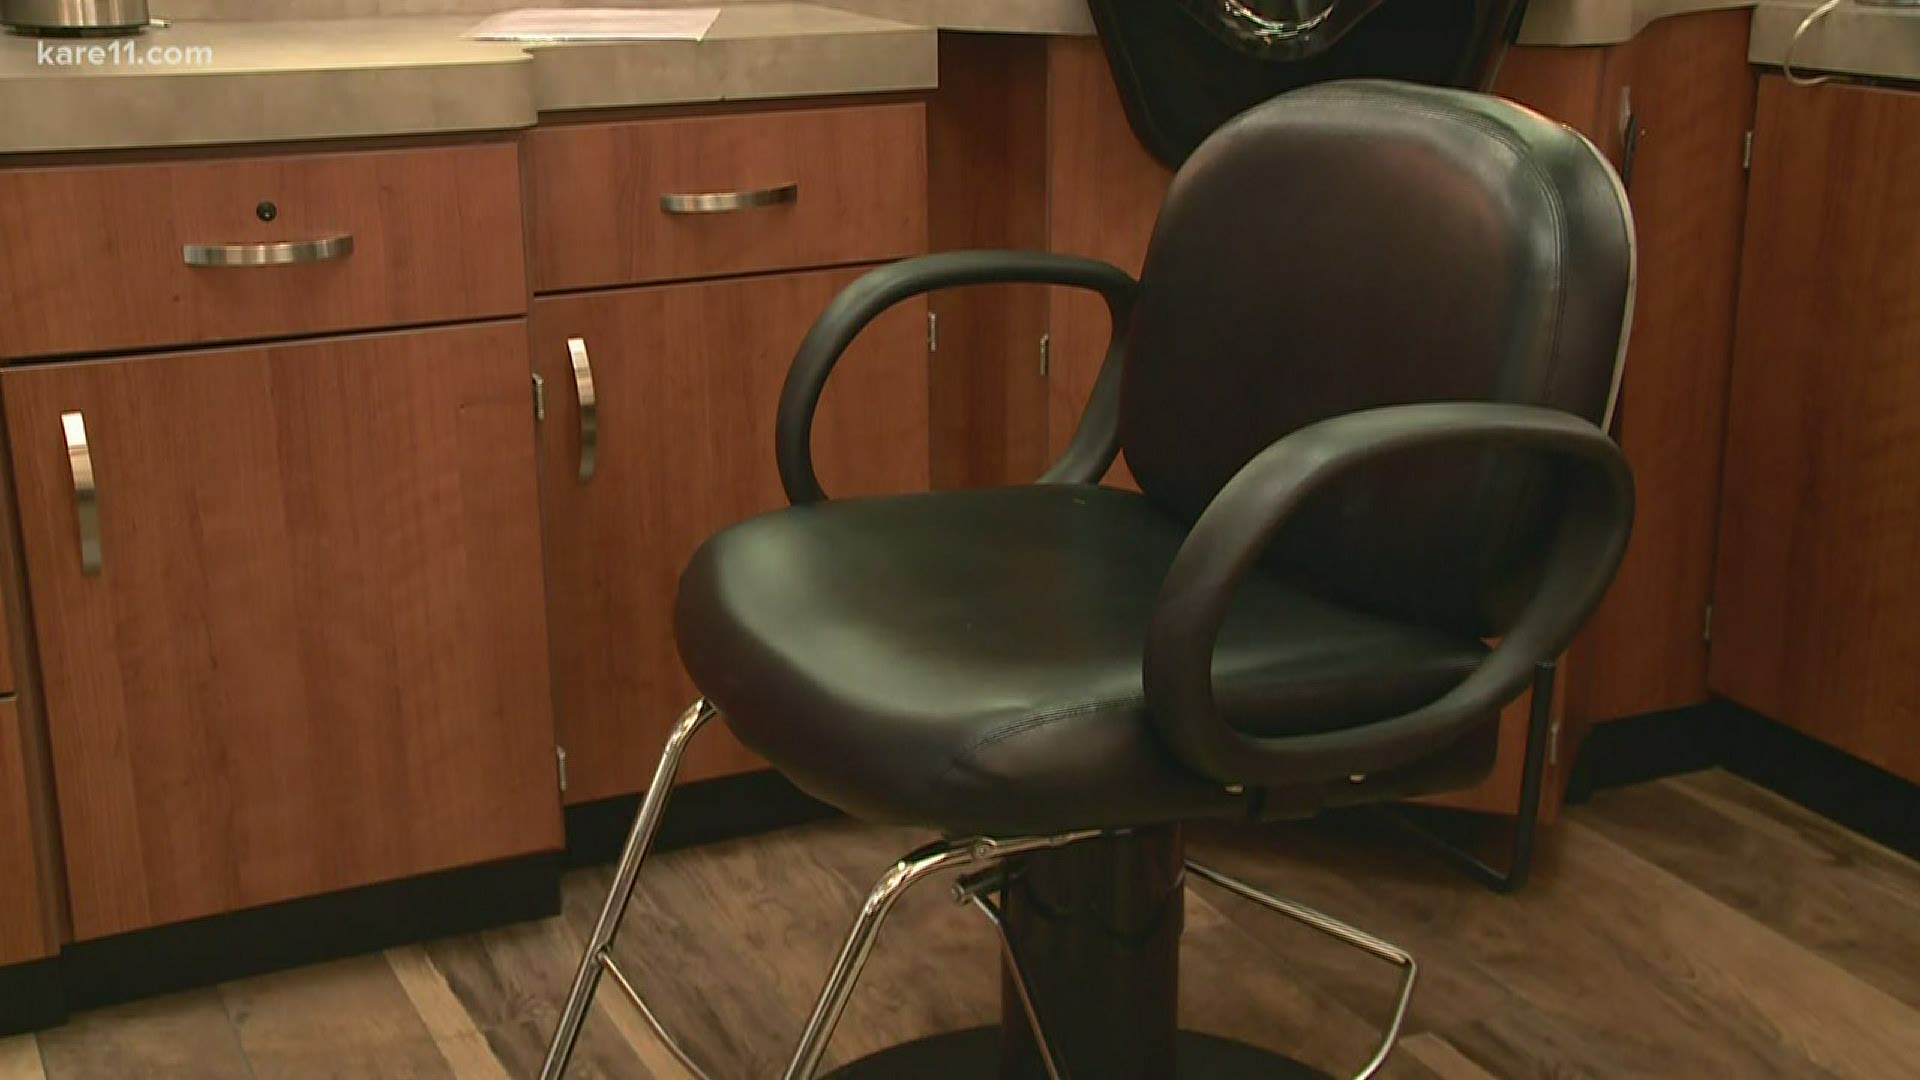 The general manager of Sola Salon Studios in Edina says he's waiting on clarification from the Board of Cosmetology.